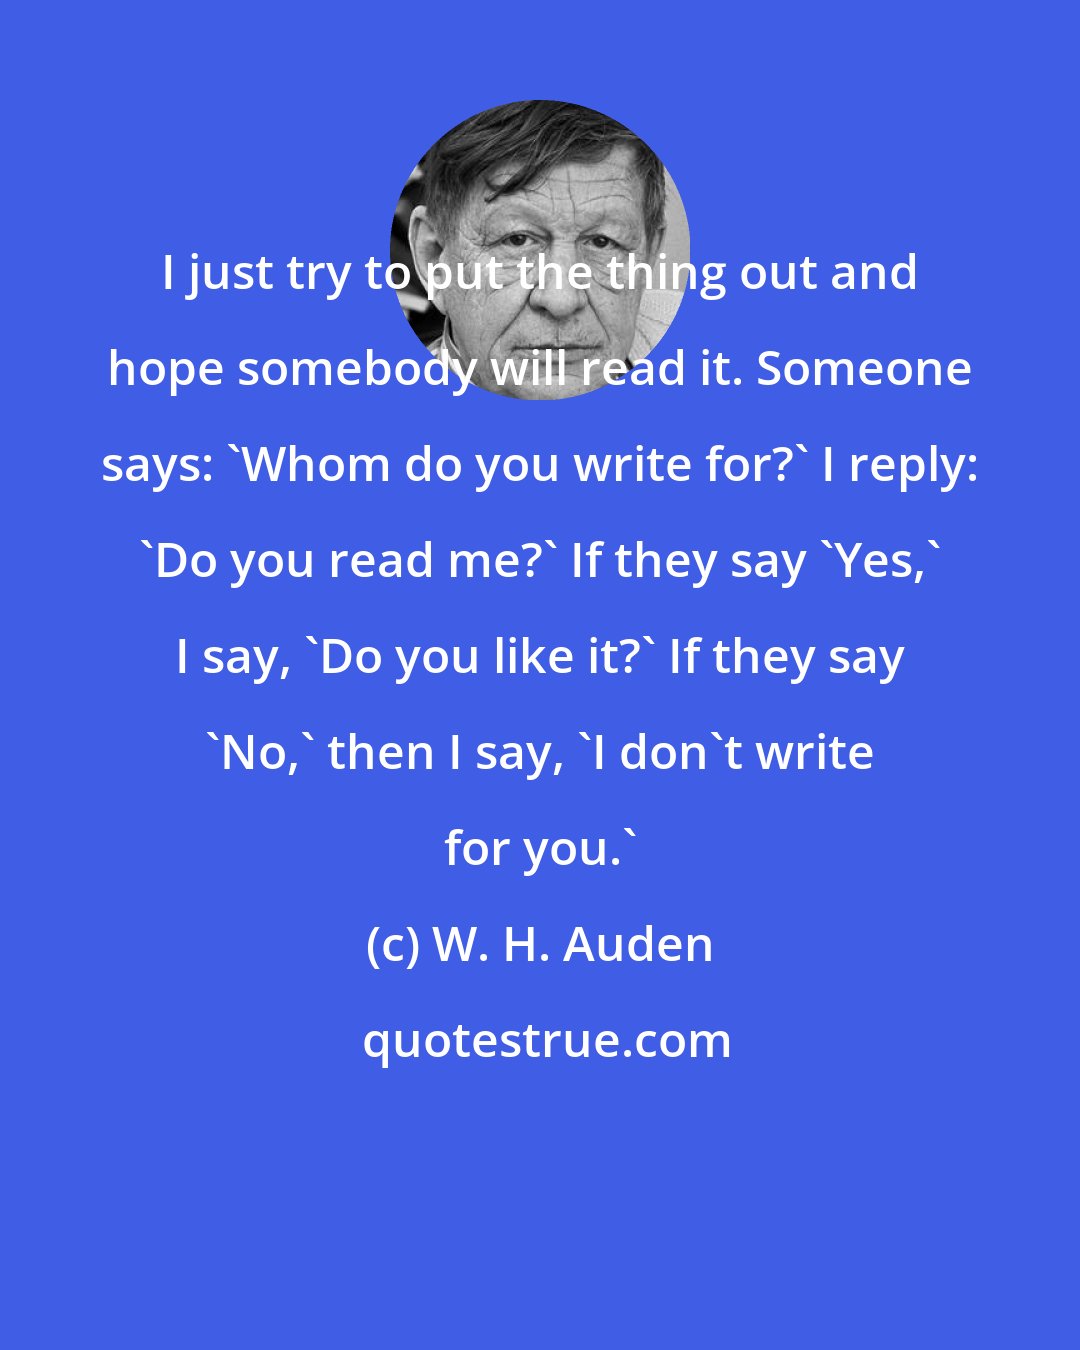 W. H. Auden: I just try to put the thing out and hope somebody will read it. Someone says: 'Whom do you write for?' I reply: 'Do you read me?' If they say 'Yes,' I say, 'Do you like it?' If they say 'No,' then I say, 'I don't write for you.'